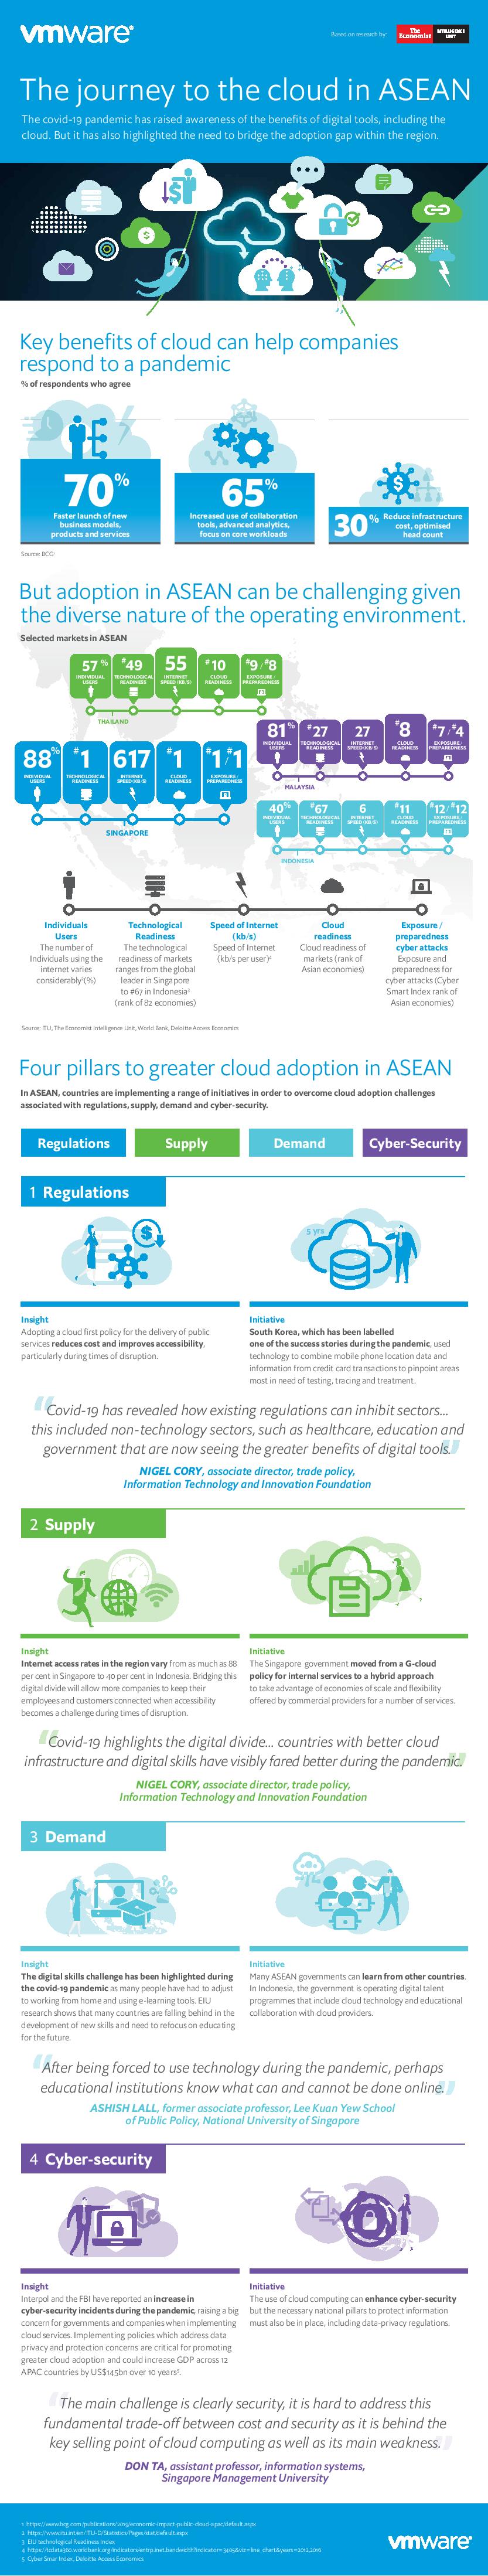 Infographic | The journey to the cloud in ASEAN